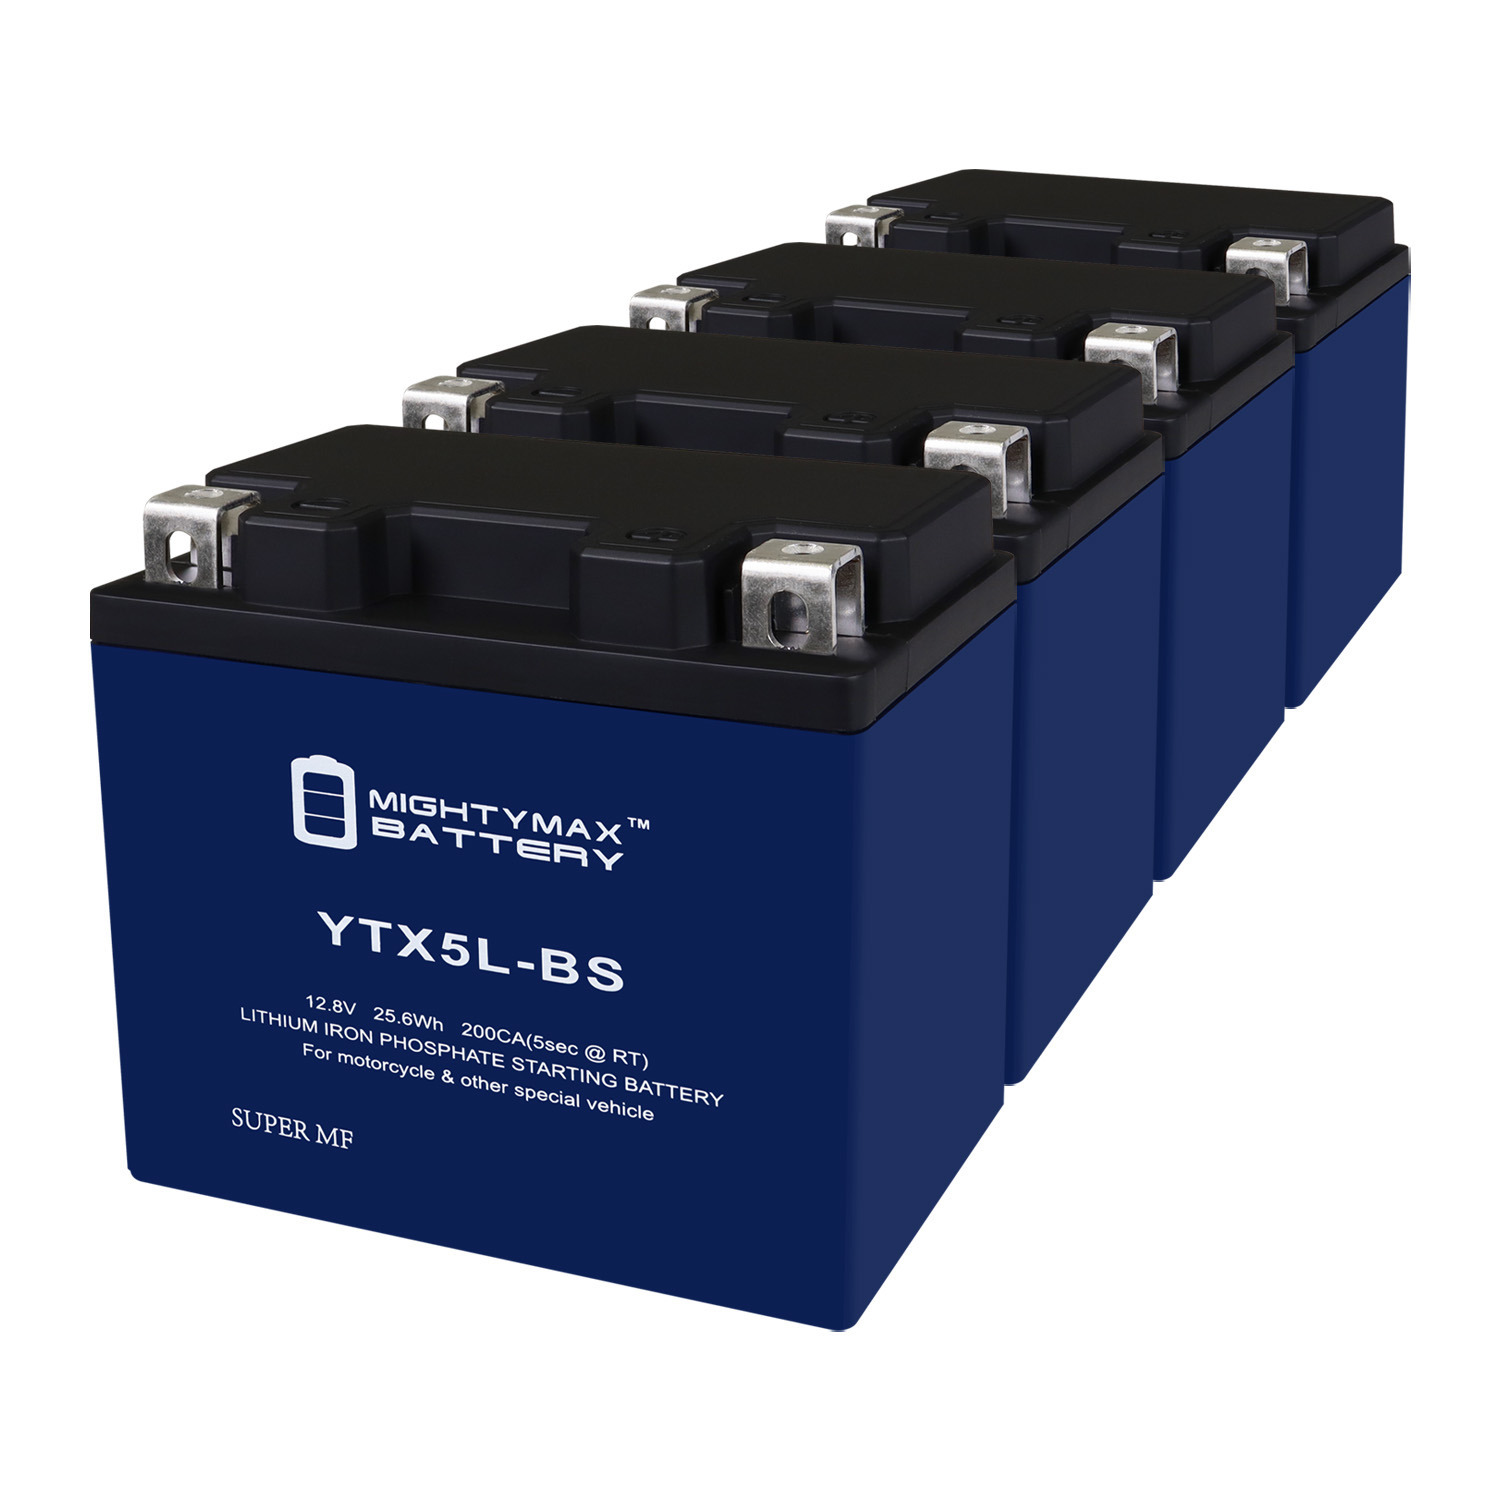 Mighty Max Battery YTX5L-BSLIFEPO4 - 12 Volt 4 AH, 150 CCA, Lithium Iron Phosphate (LiFePO4) Battery - Pack of 4